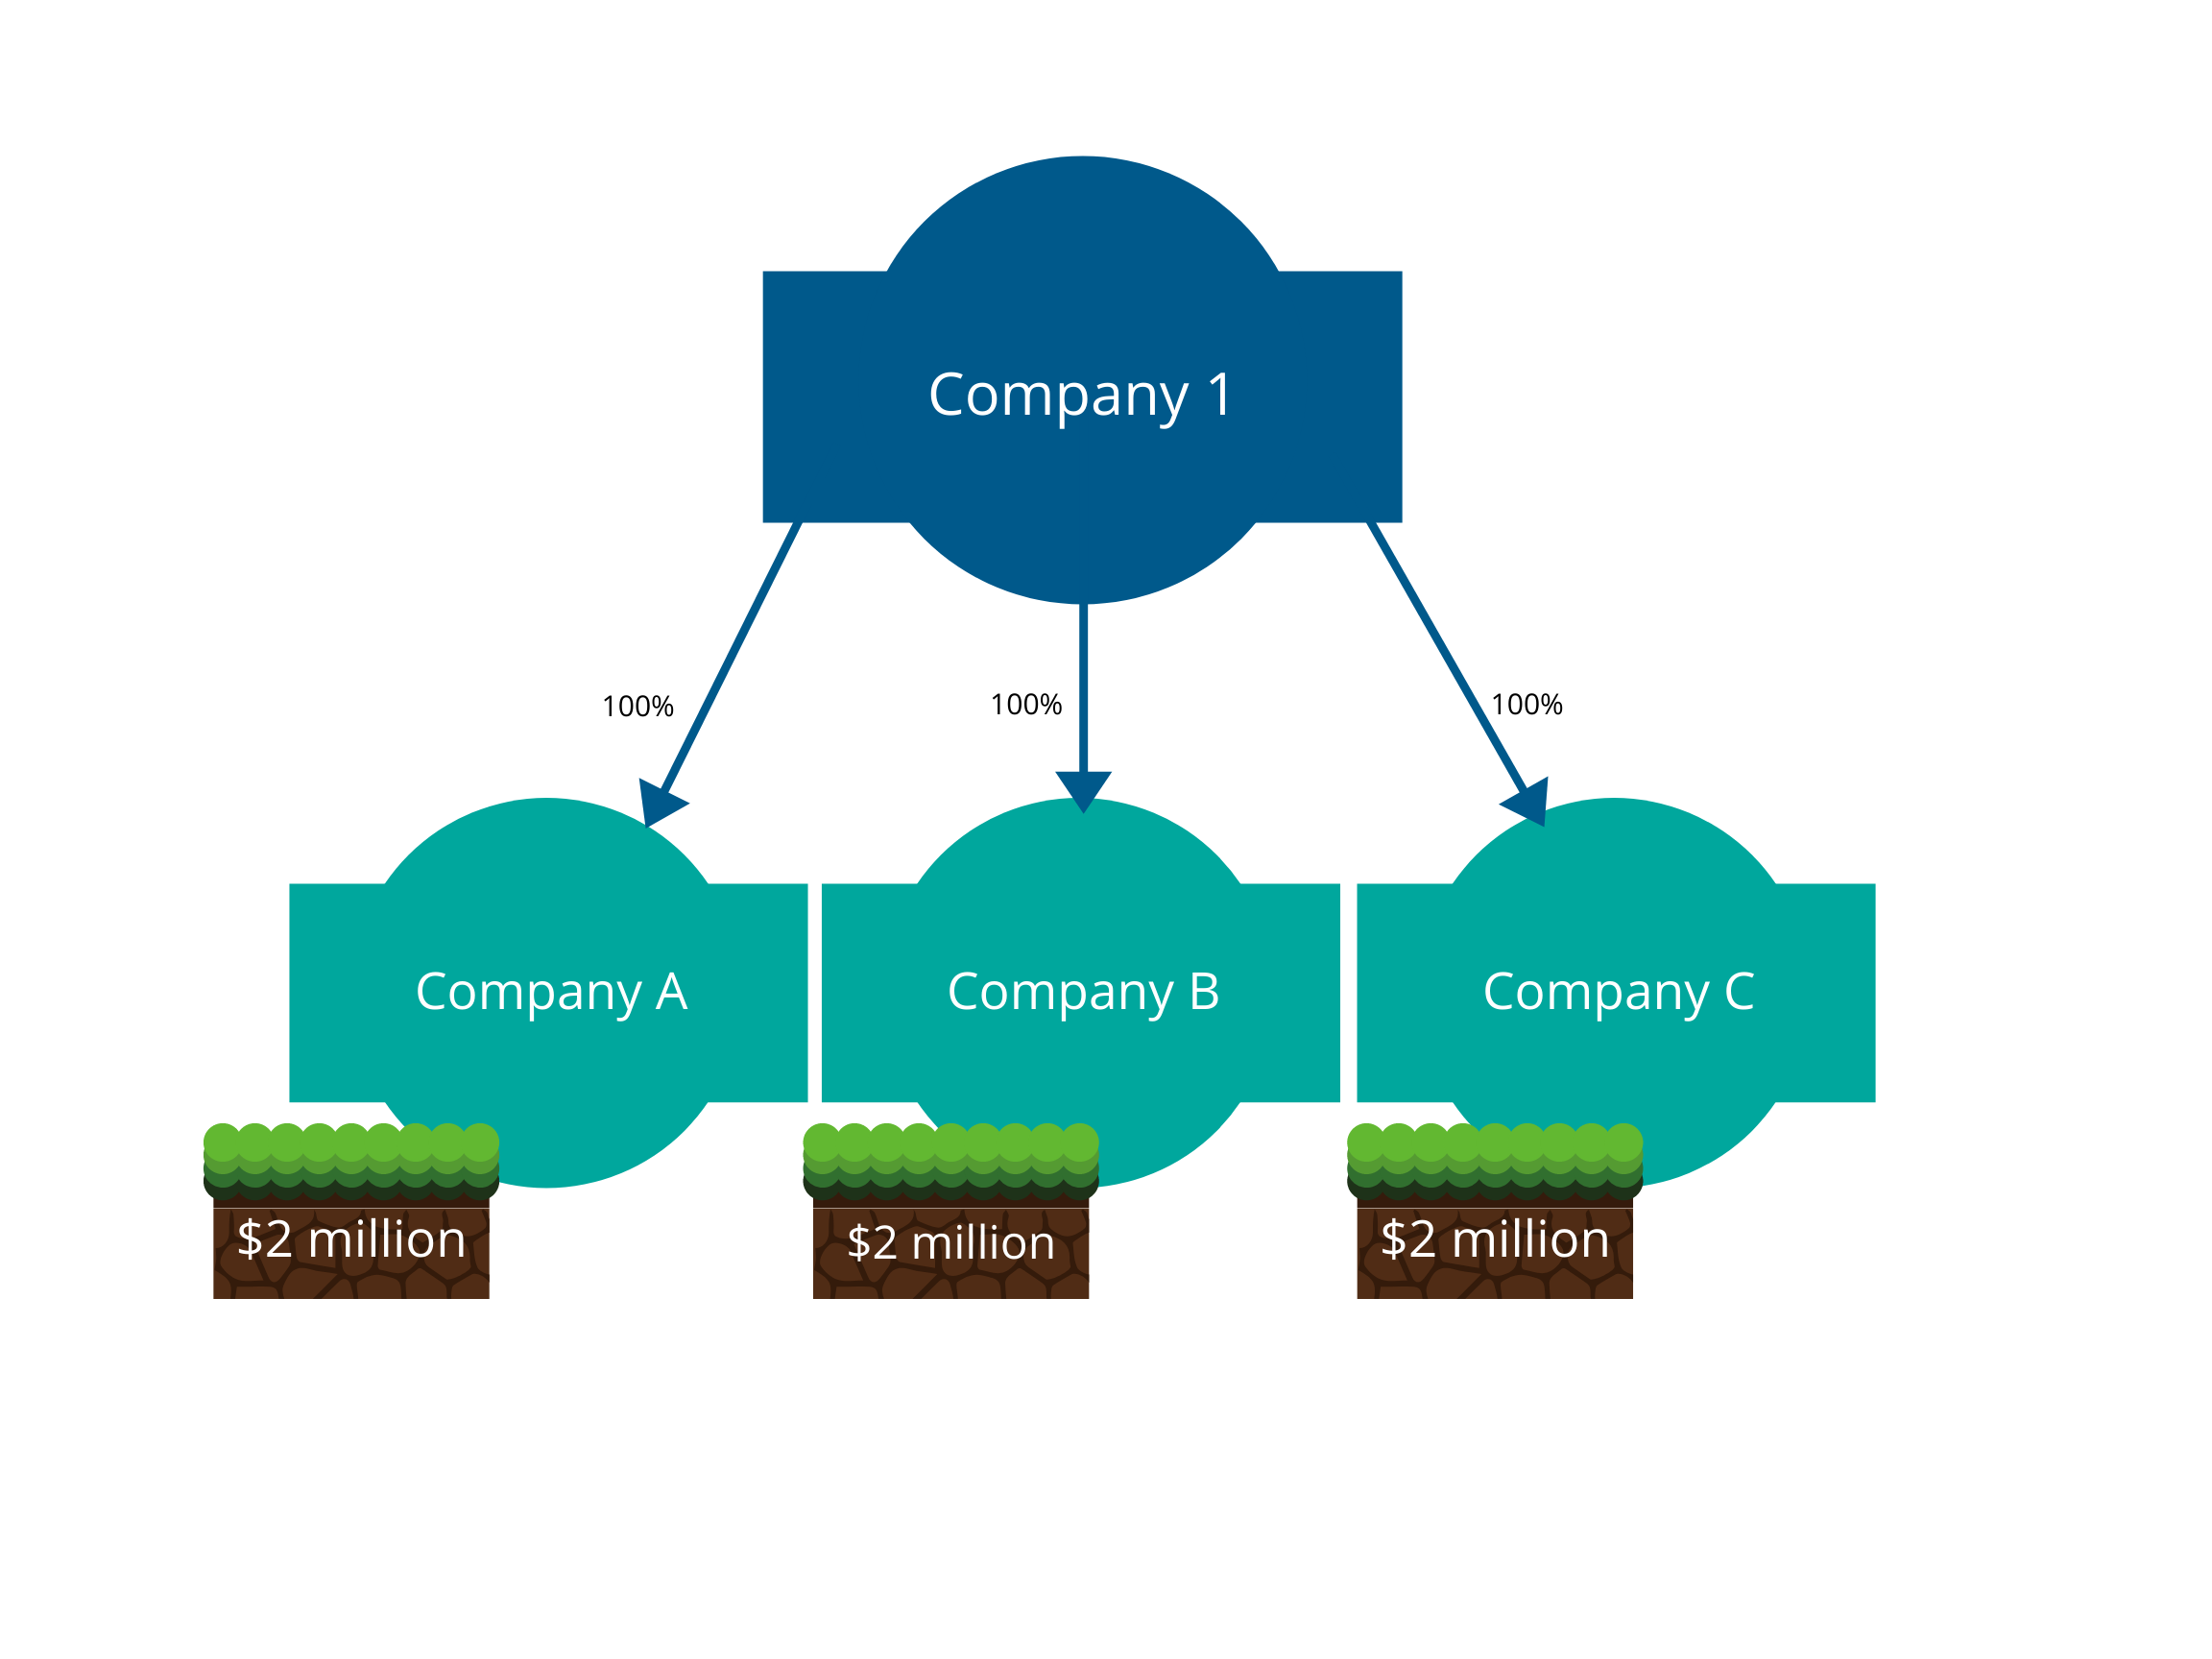 Illustration showing Company 1 has 100% shares in 3 different companies all with $2 million of land holdings